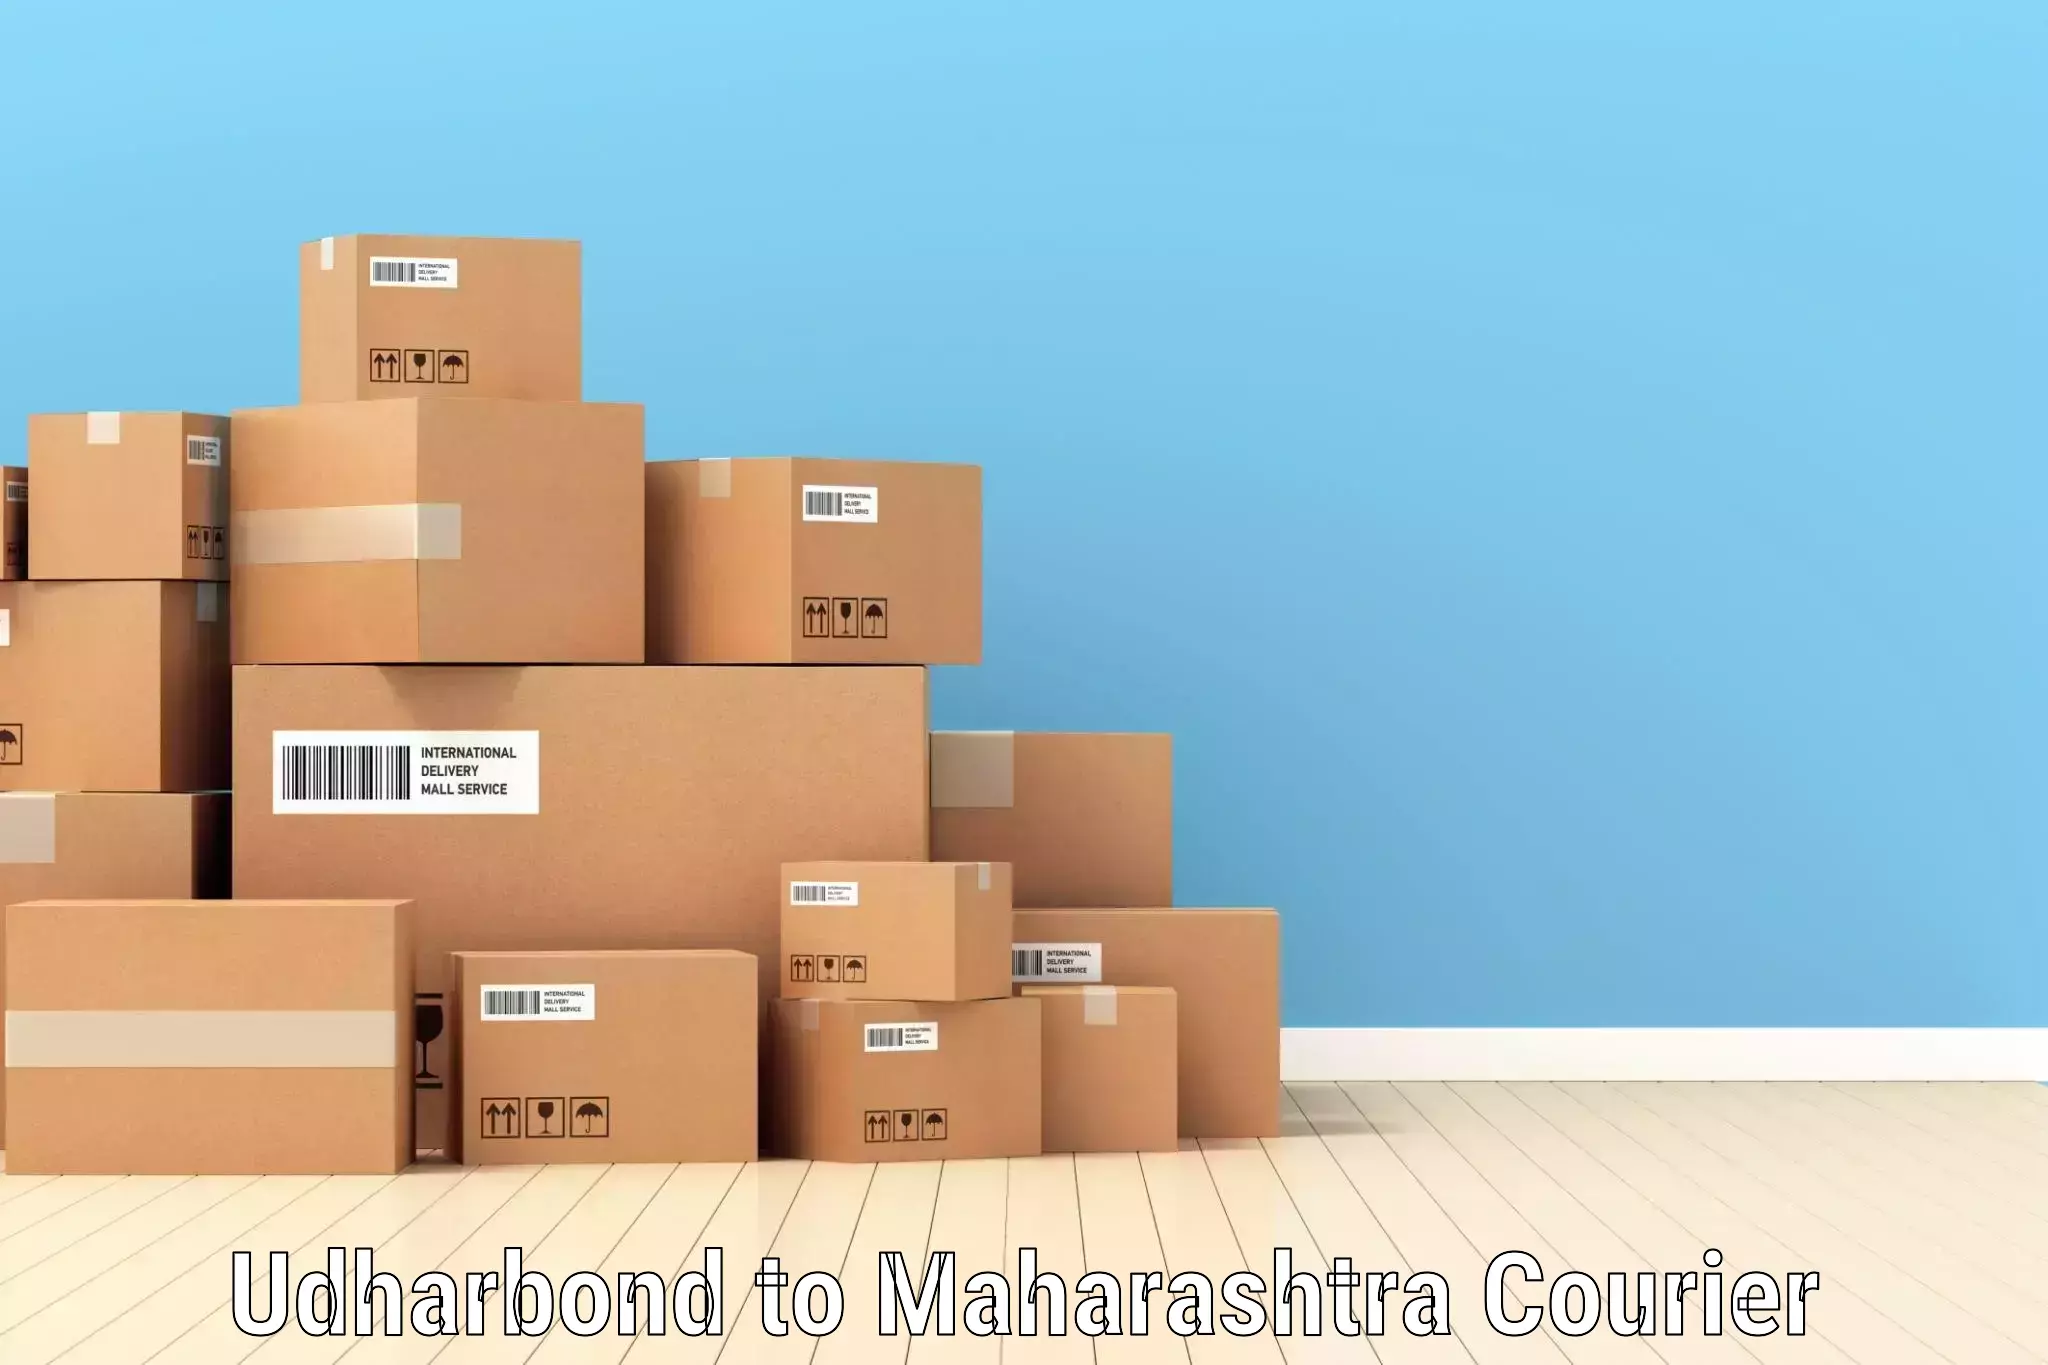 End-to-end delivery Udharbond to Maharashtra